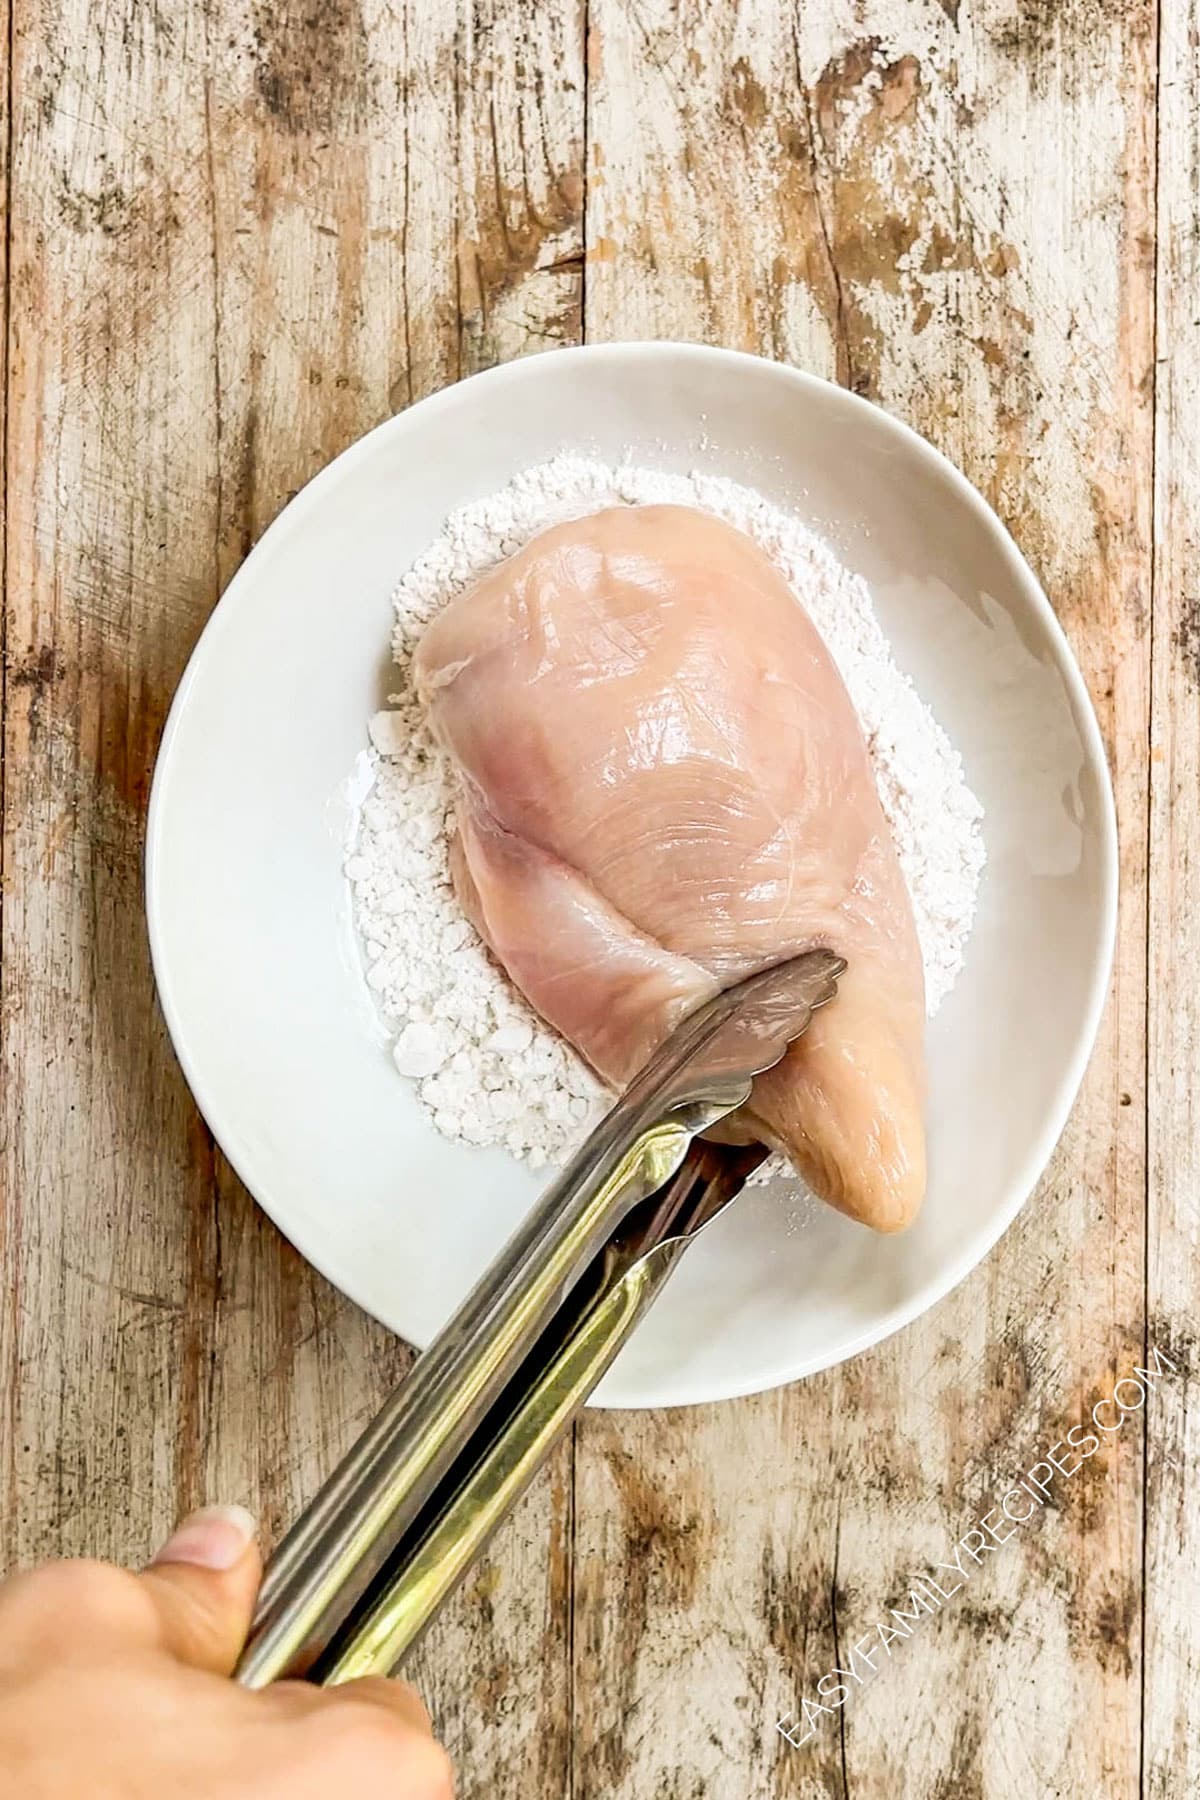 Tongs dipping a chicken breast into a bowl of flour.